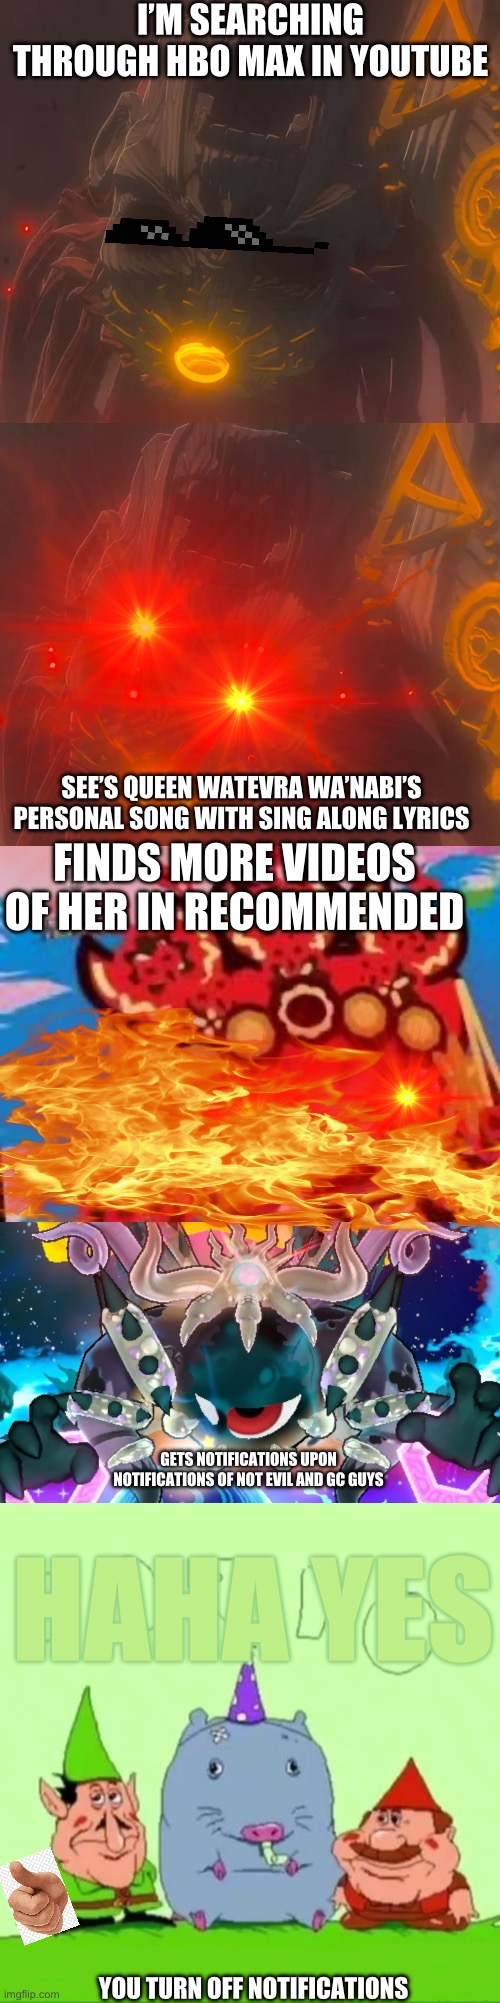 Calamitous Resentment Restored | I’M SEARCHING THROUGH HBO MAX IN YOUTUBE; SEE’S QUEEN WATEVRA WA’NABI’S PERSONAL SONG WITH SING ALONG LYRICS; FINDS MORE VIDEOS OF HER IN RECOMMENDED; GETS NOTIFICATIONS UPON NOTIFICATIONS OF NOT EVIL AND GC GUYS; HAHA YES; YOU TURN OFF NOTIFICATIONS | image tagged in calamity regained but longer | made w/ Imgflip meme maker